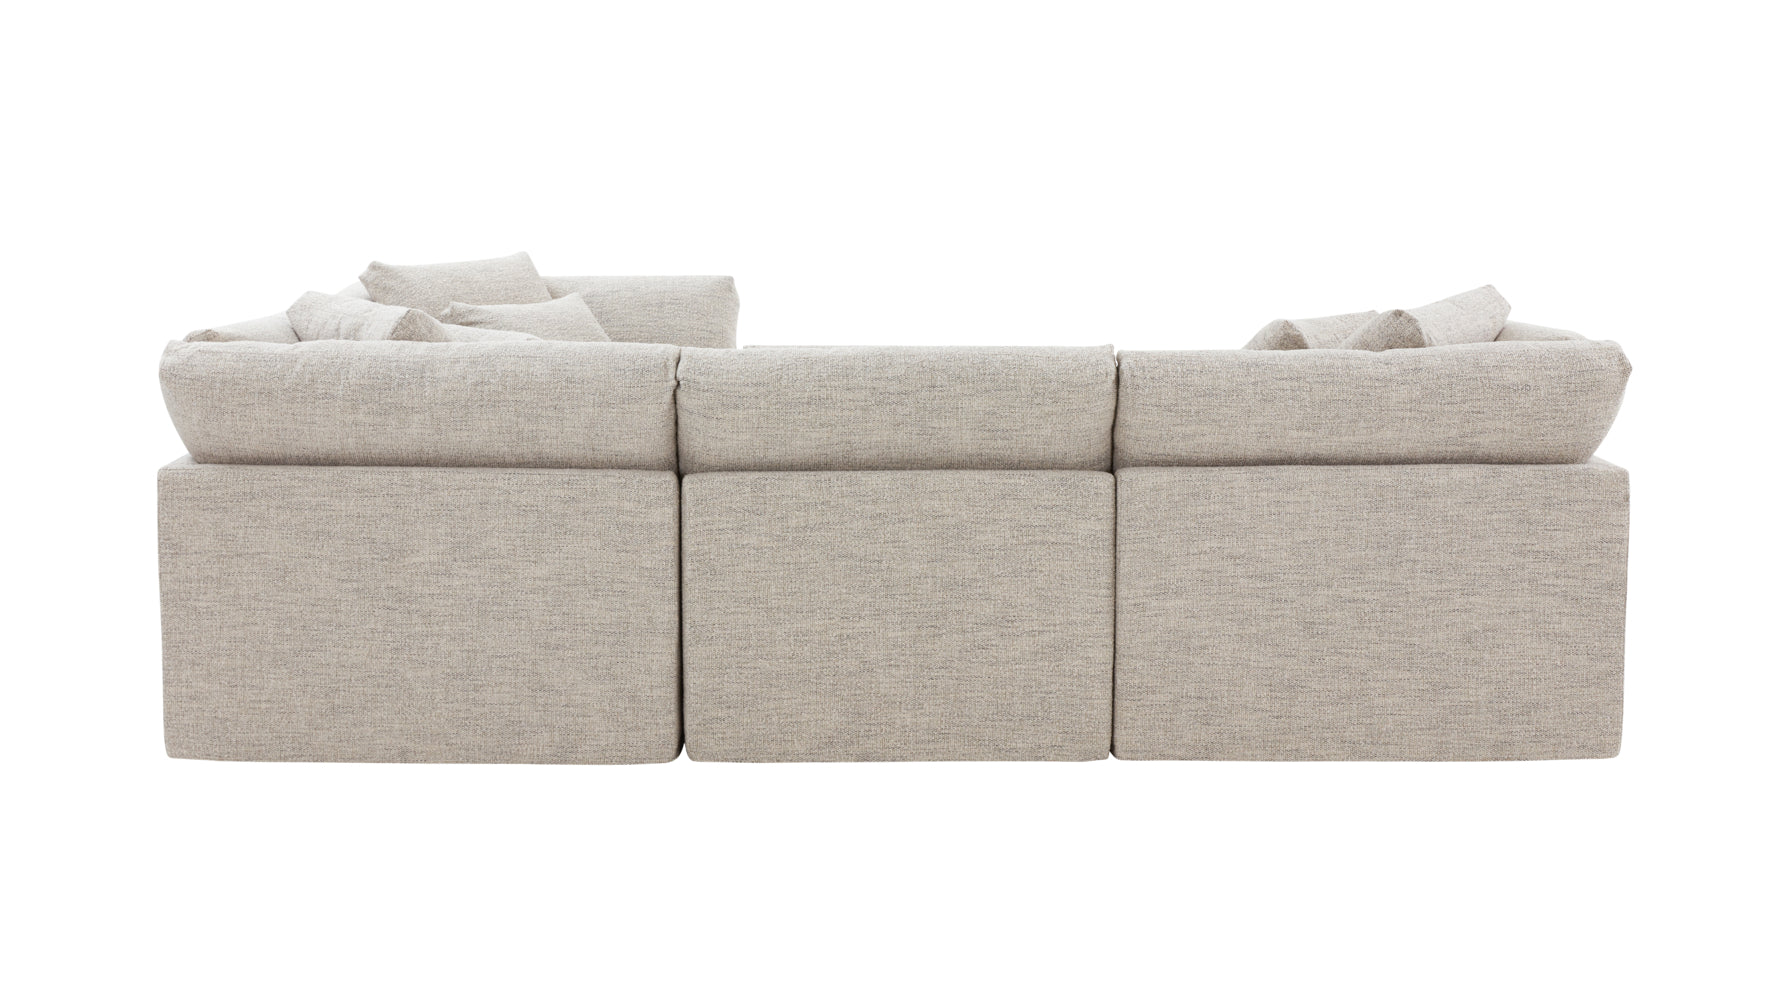 Get Together™ 4-Piece Modular Sectional Closed, Large, Oatmeal - Image 6